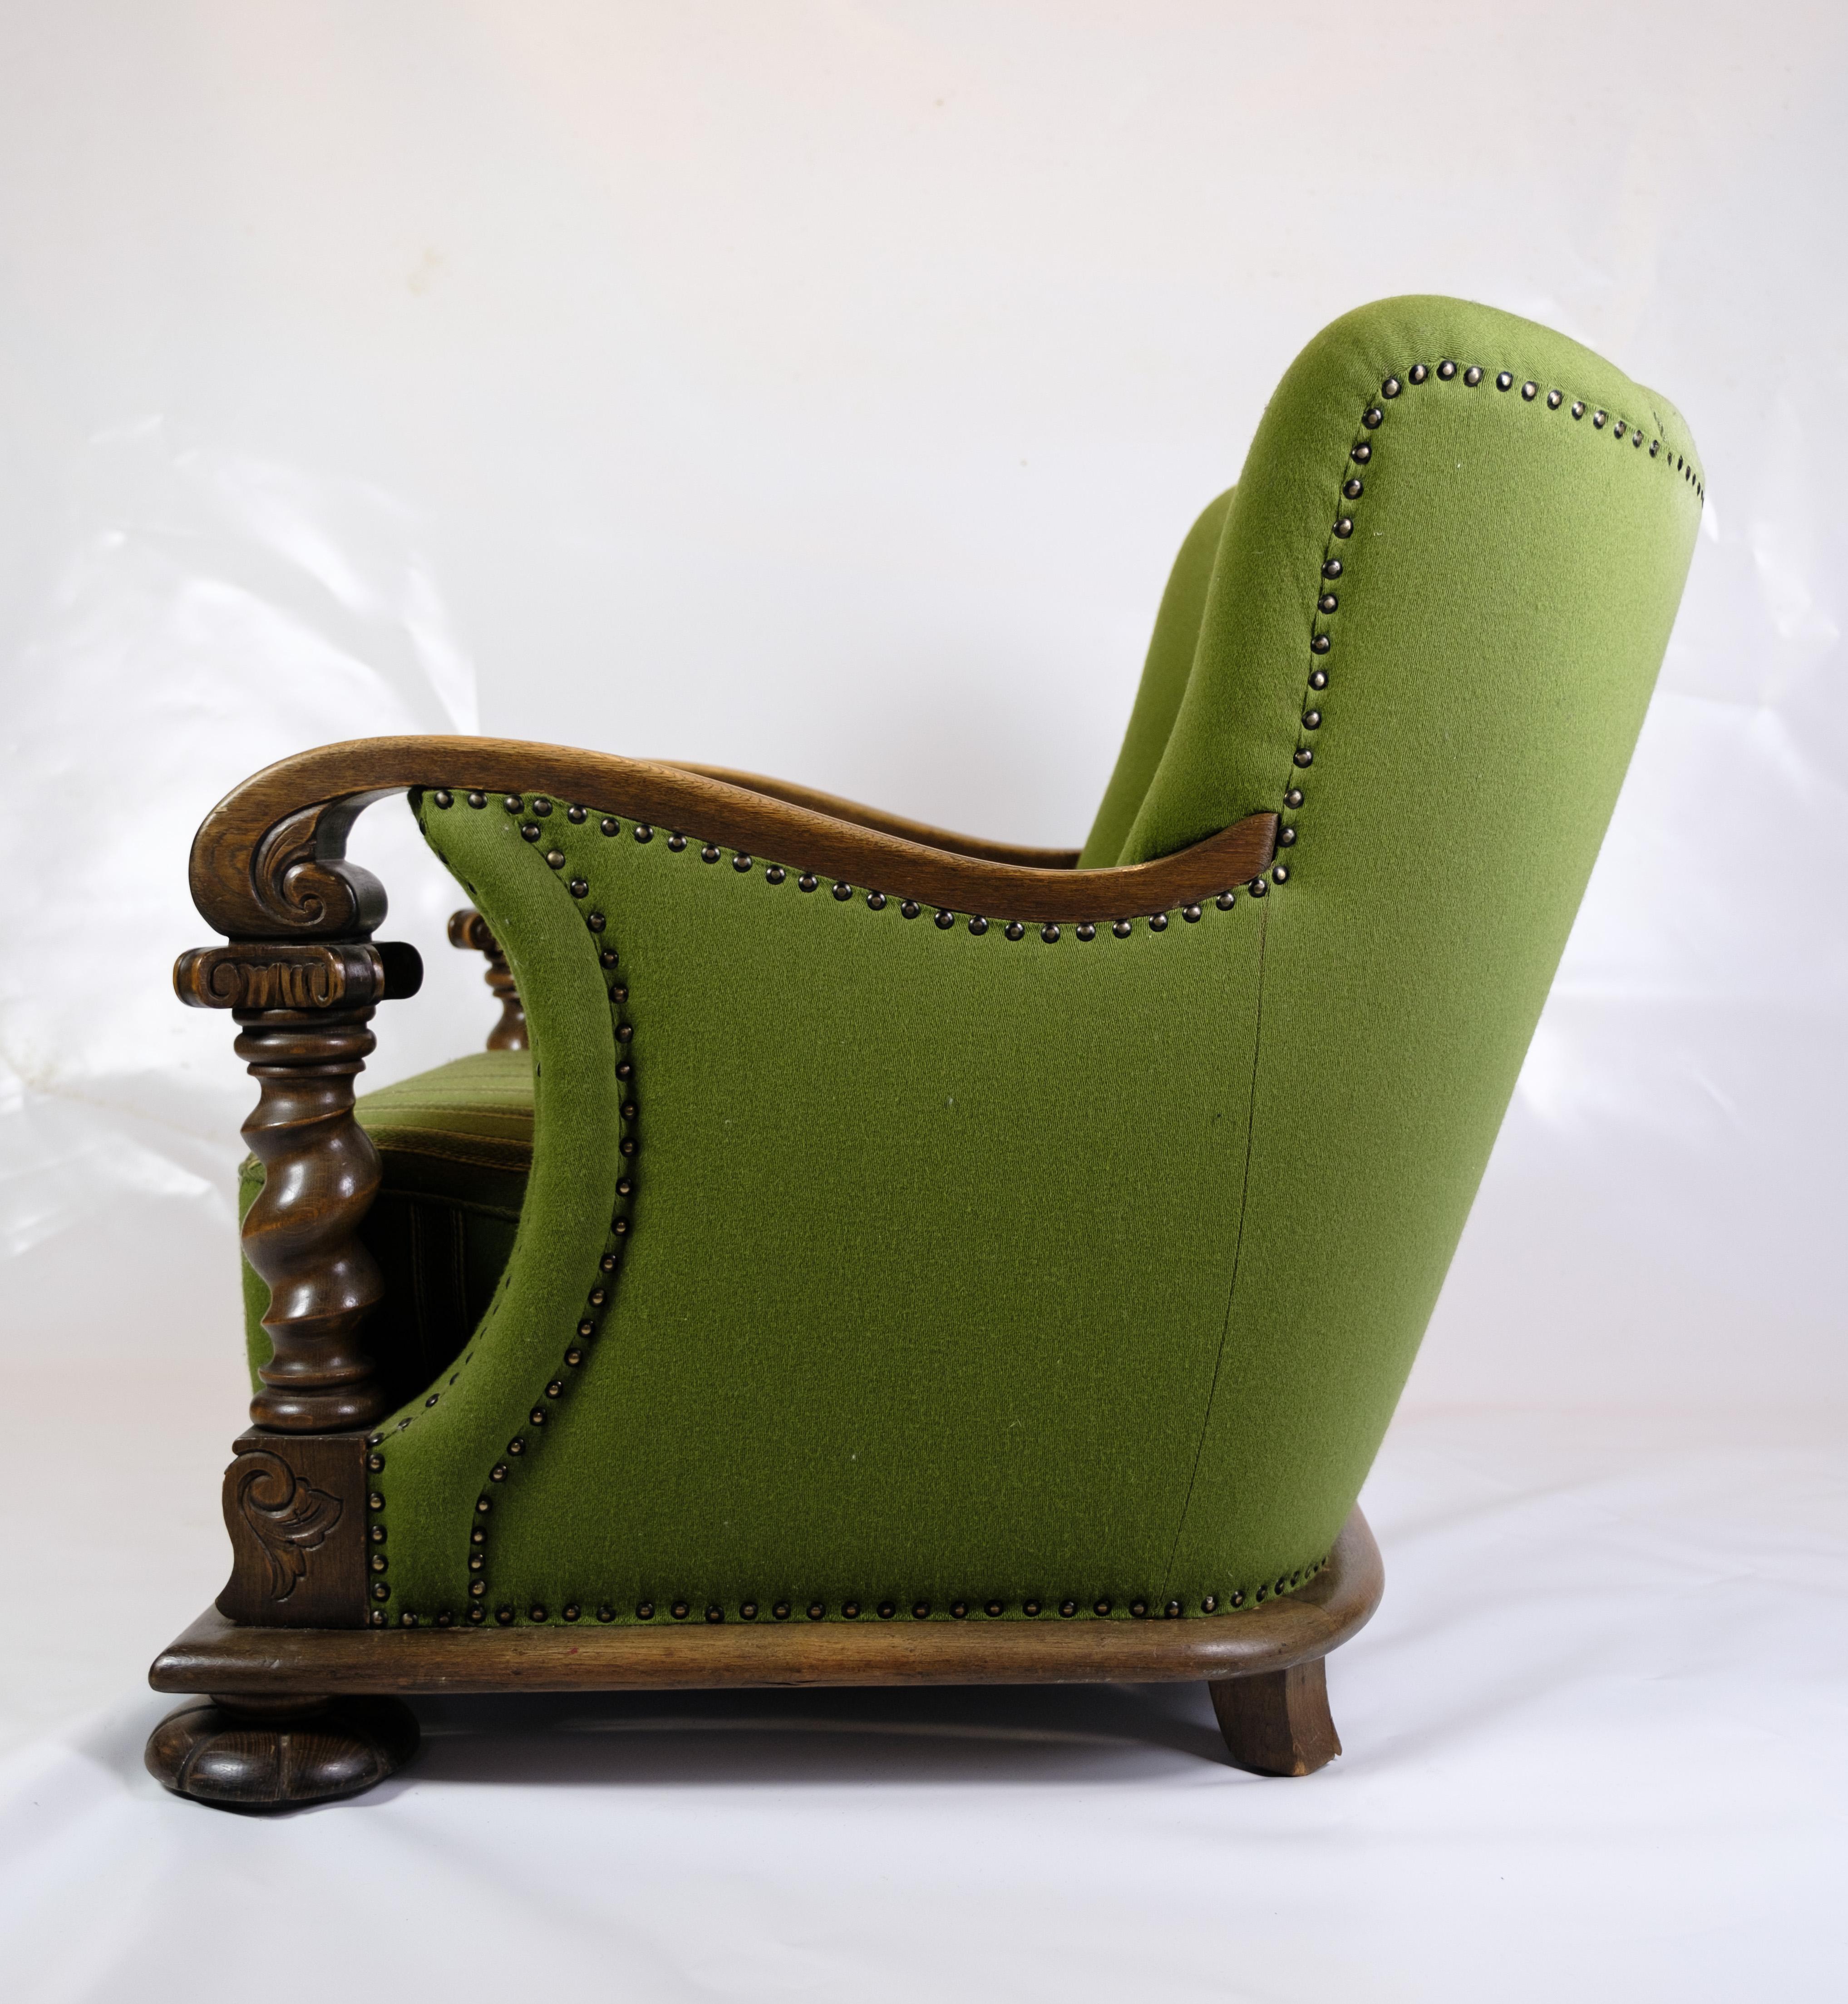 Embrace the Timeless Renaissance Charm - 1920s Green Upholstered Armchair

Step into a world of exquisite craftsmanship and timeless beauty with this captivating armchair inspired by the Renaissance period.

Crafted in the 1920s, this armchair